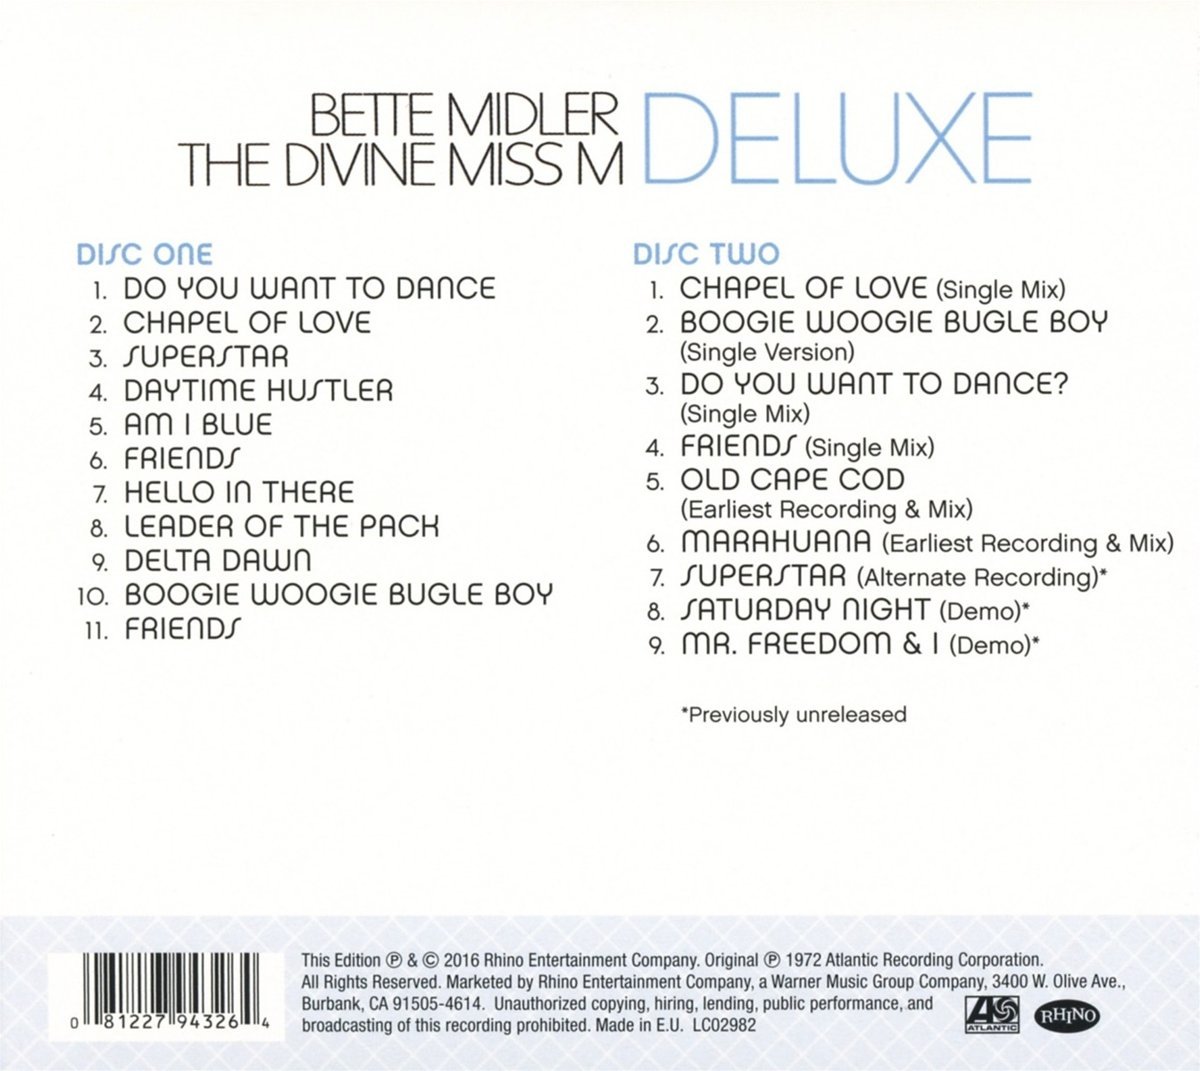 The Divine Miss M – Deluxe Edition | Soundtrack – Bette Midler (Deluxe poza noua